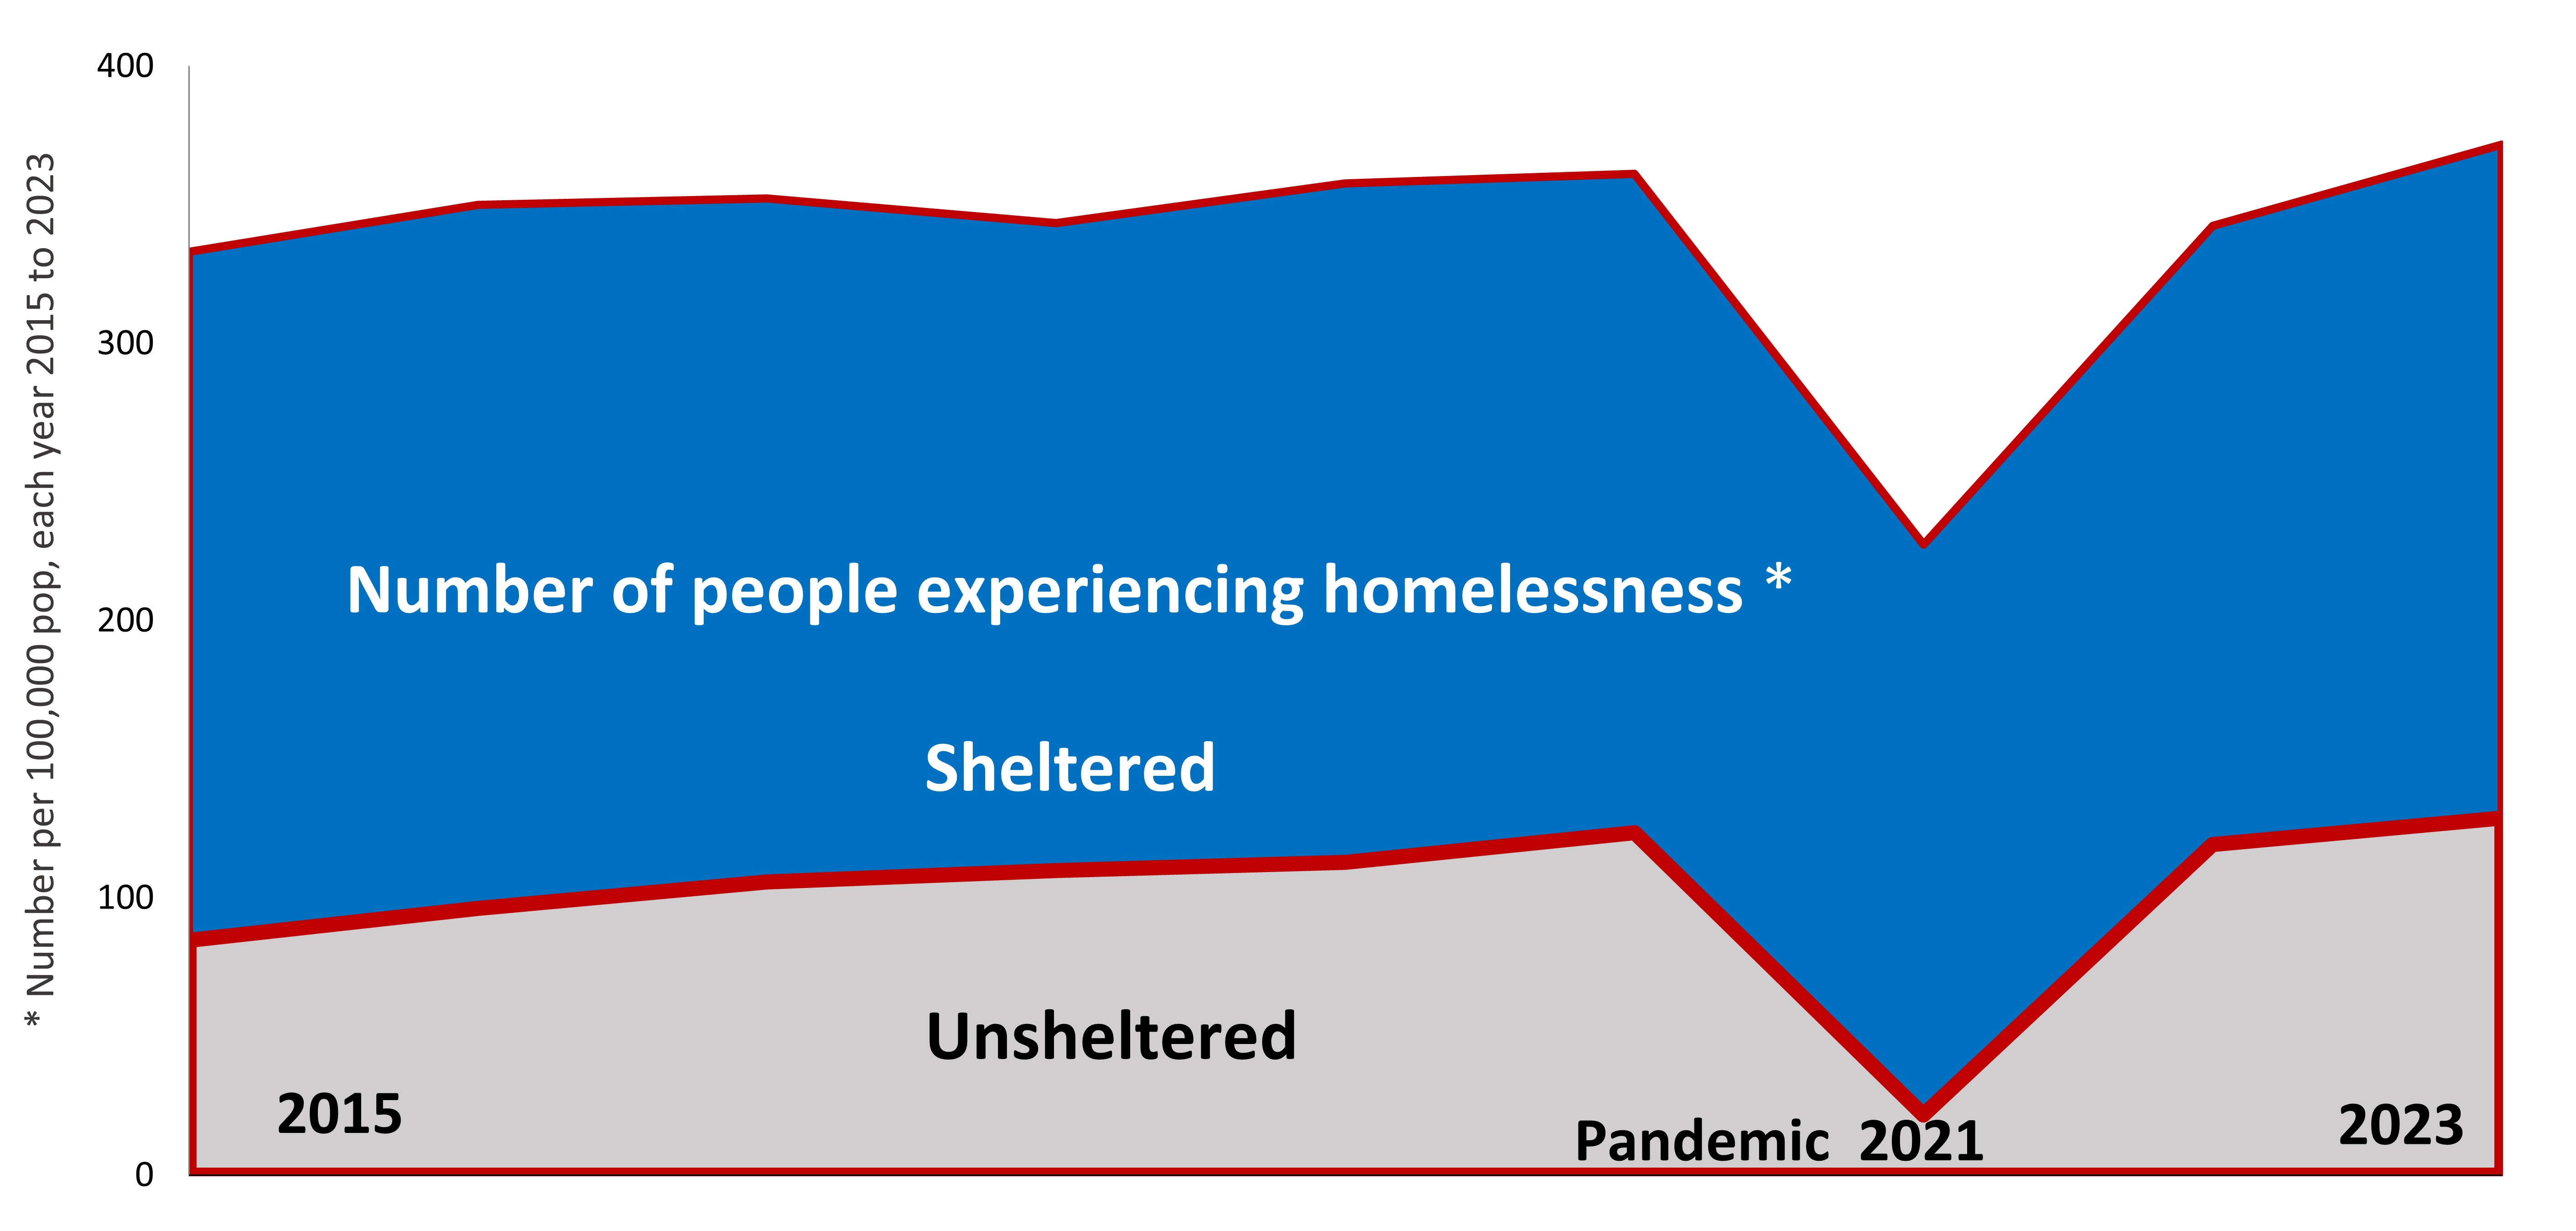 Line chart showing rates of people experiencing homelessness in big US cities from 2015-2023